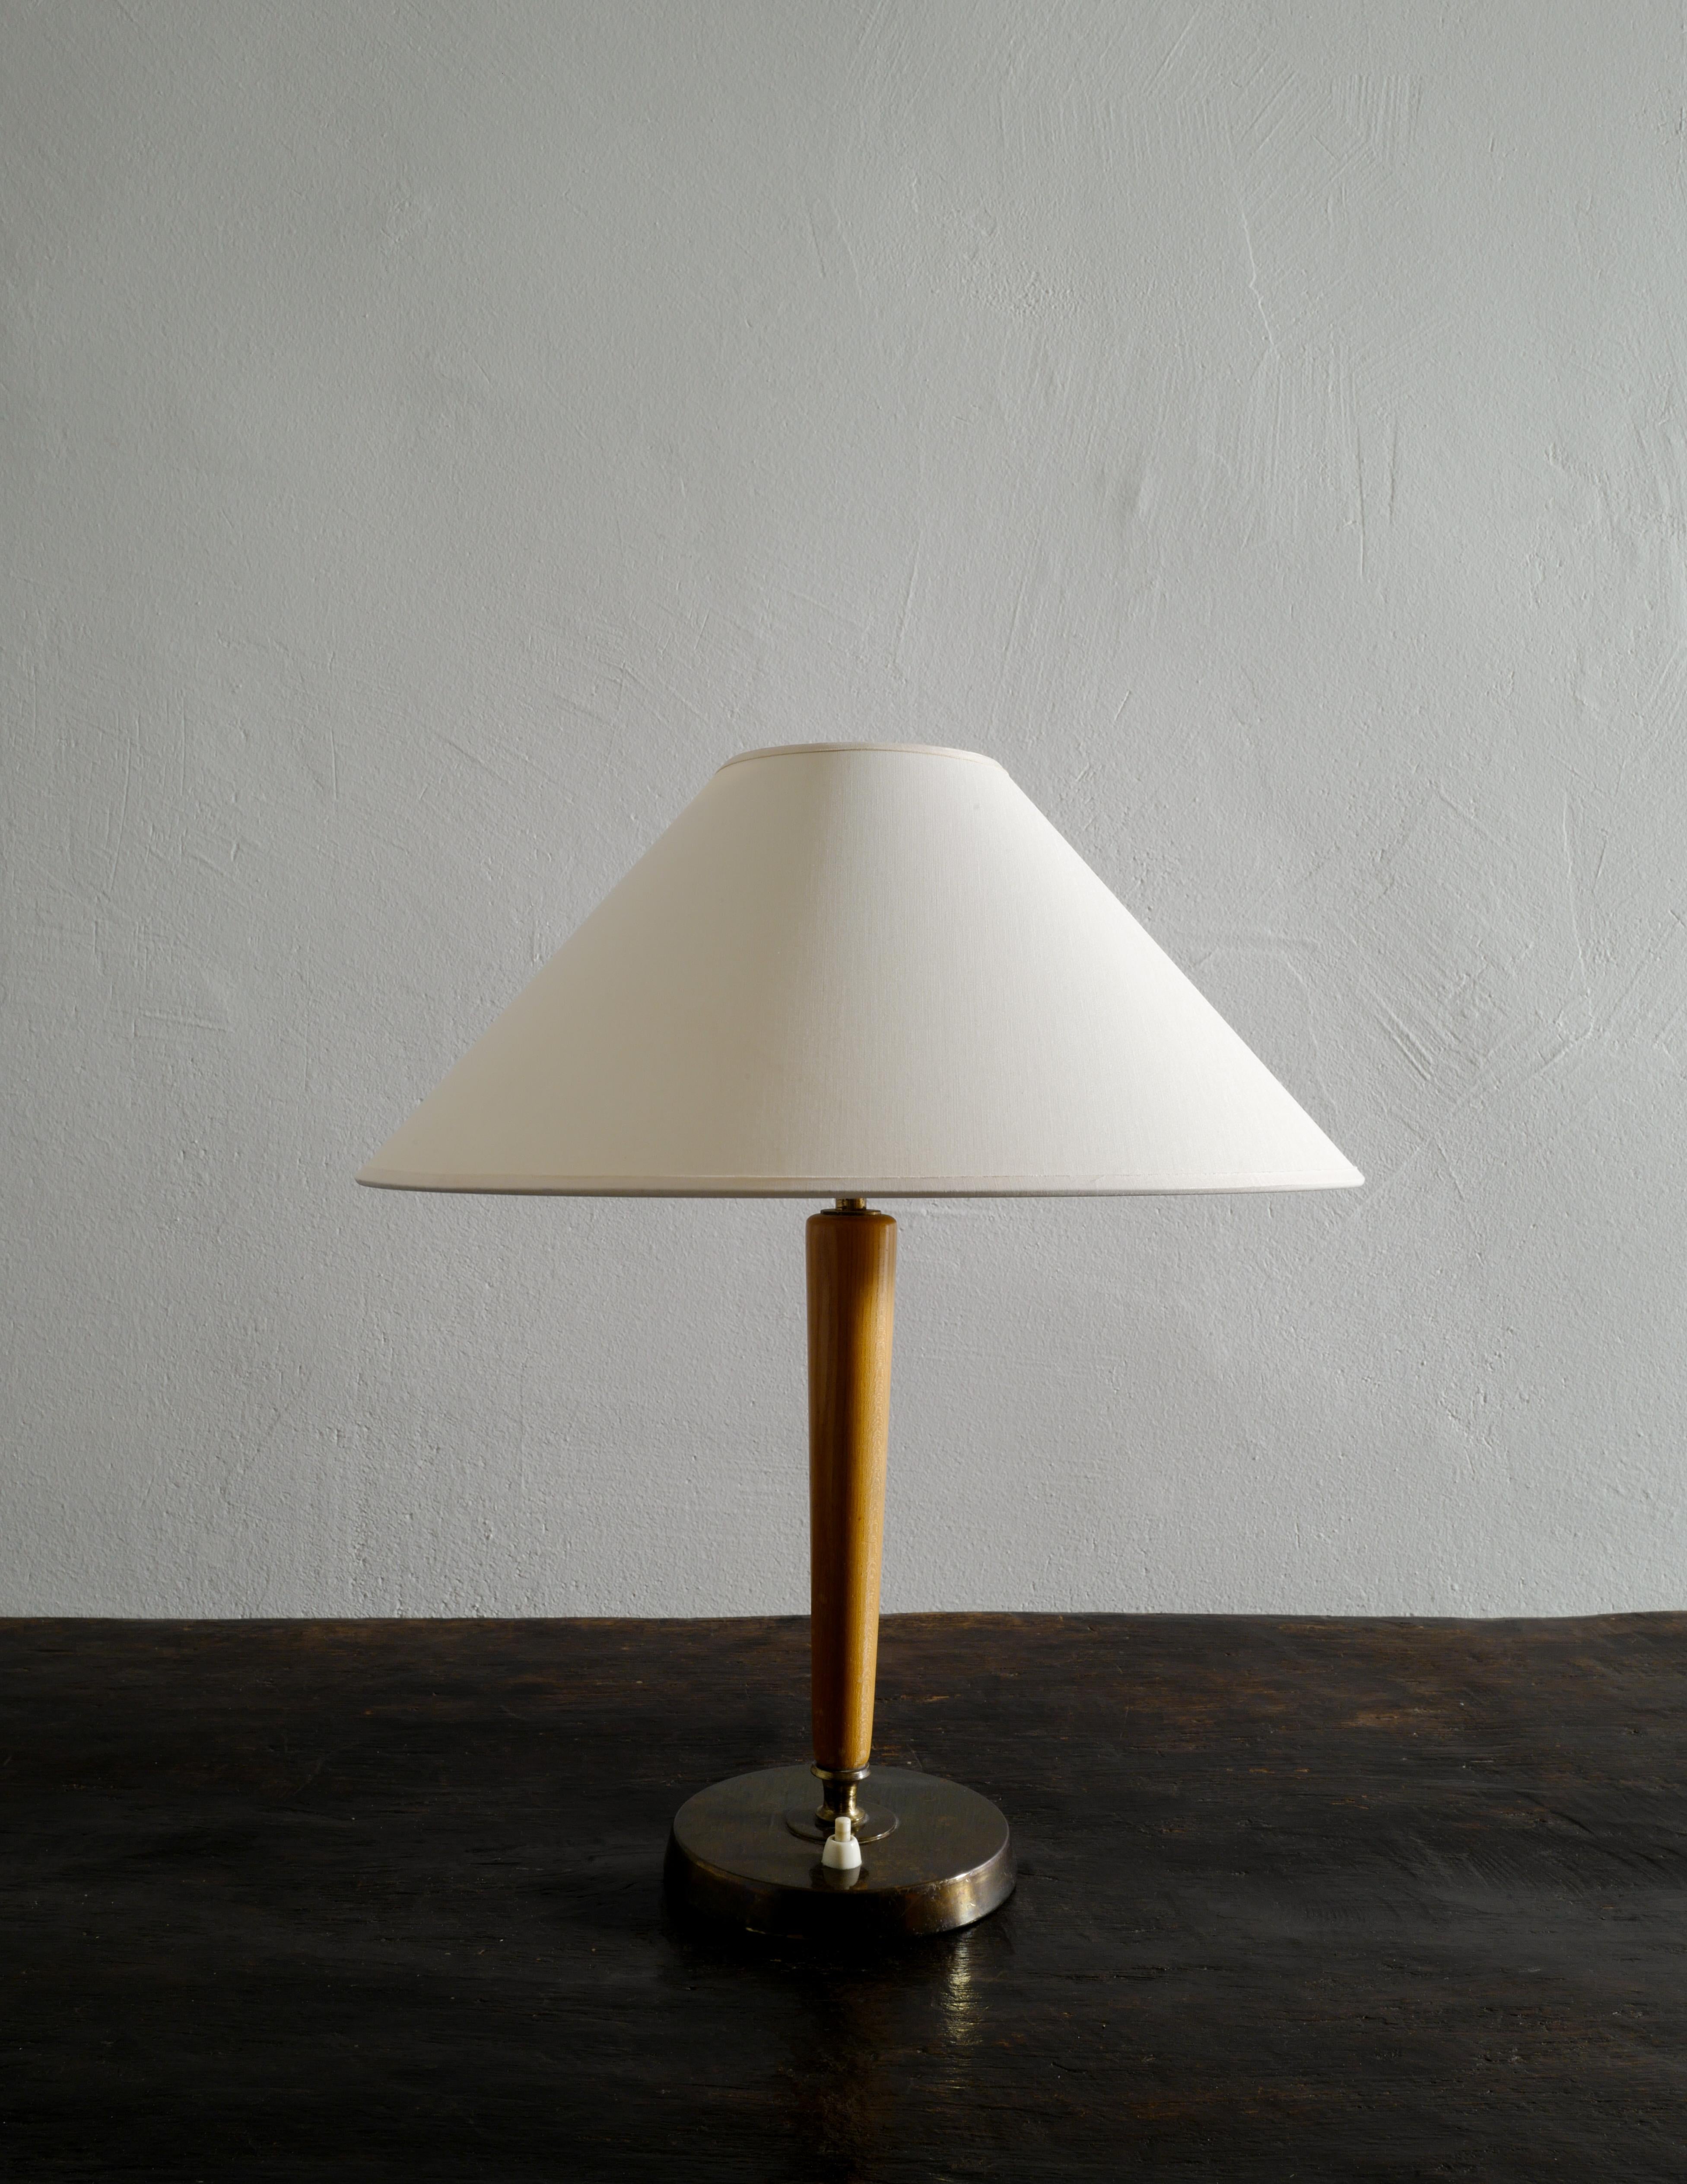 Rare mid century and scandinvian modern table / desk lamp in elm and brass produced by Nordiska Kompaniet, Sweden during the 1940s. In good vintage and original condition with patina from age and use. Working well. 
Shade is not included in the